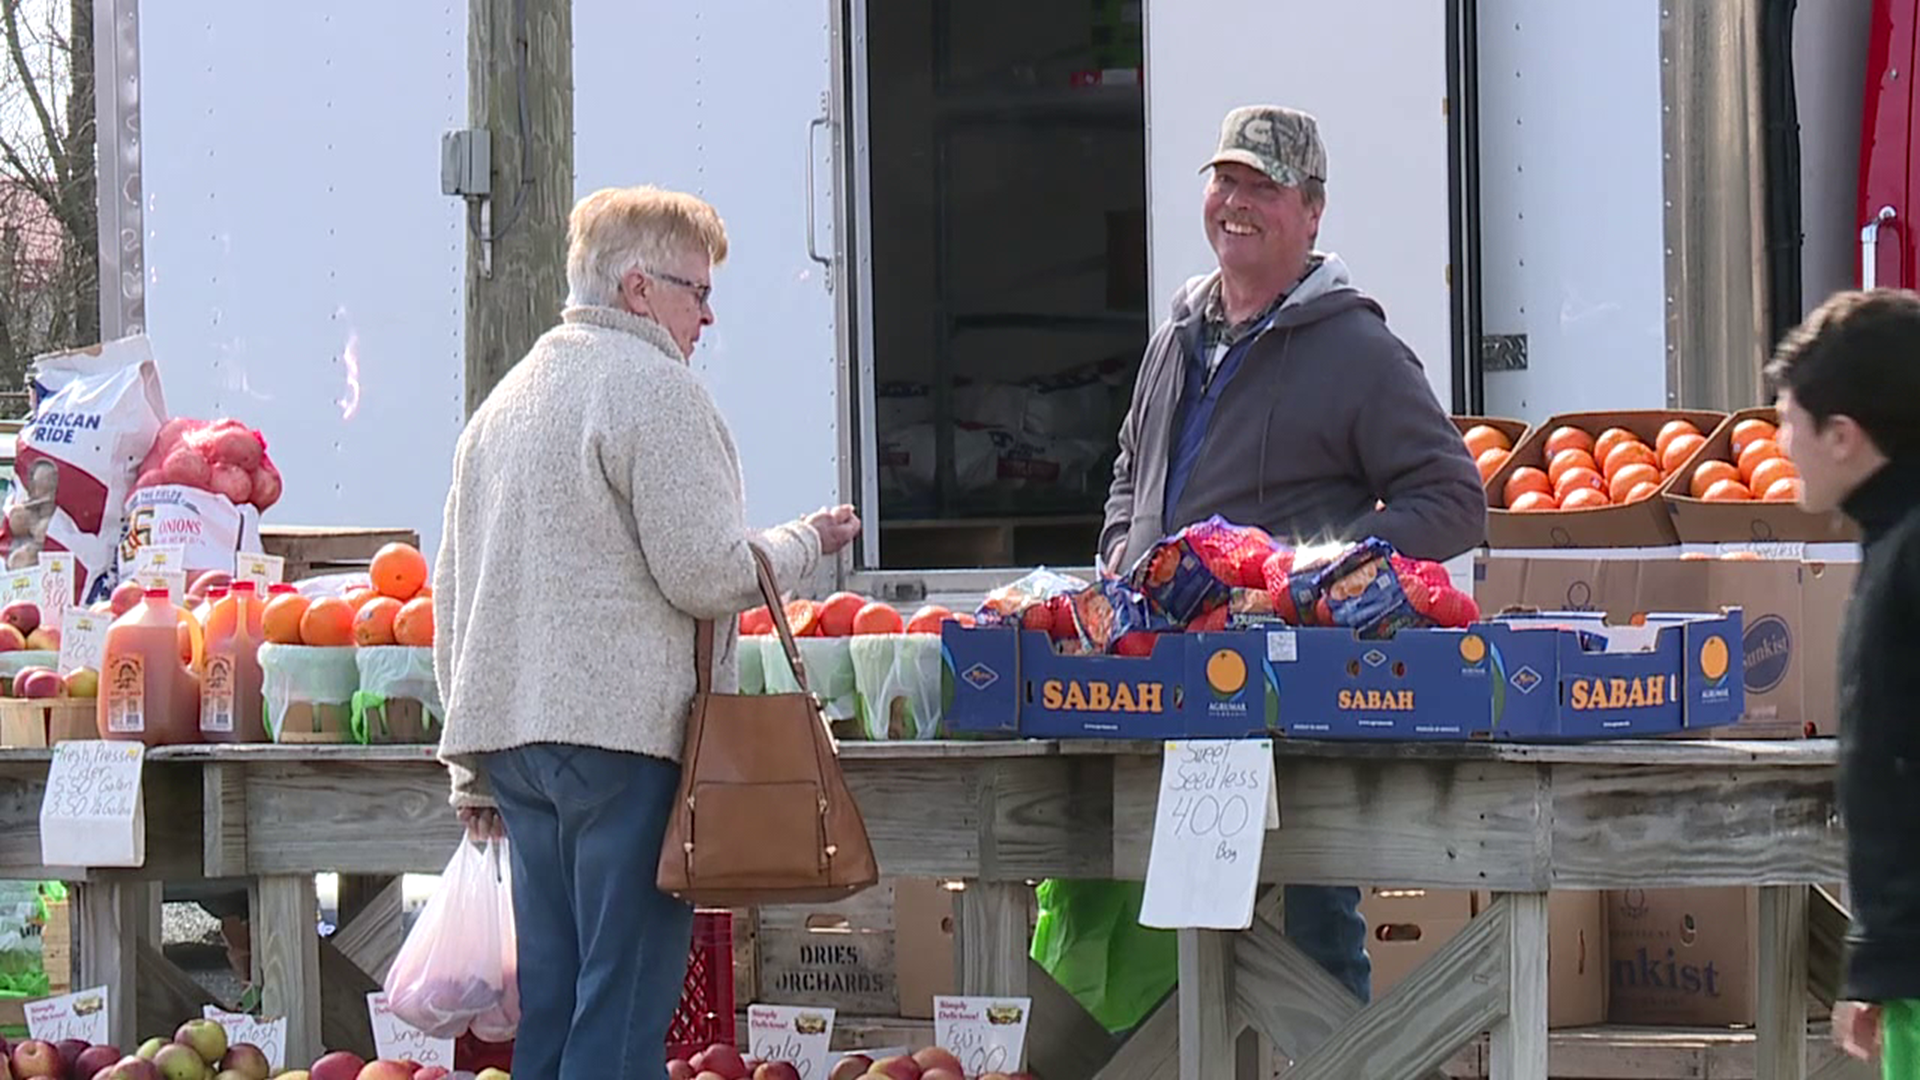 The Lewisburg Farmer's Market is making some changes to protect customers and vendors during the coronavirus outbreak.